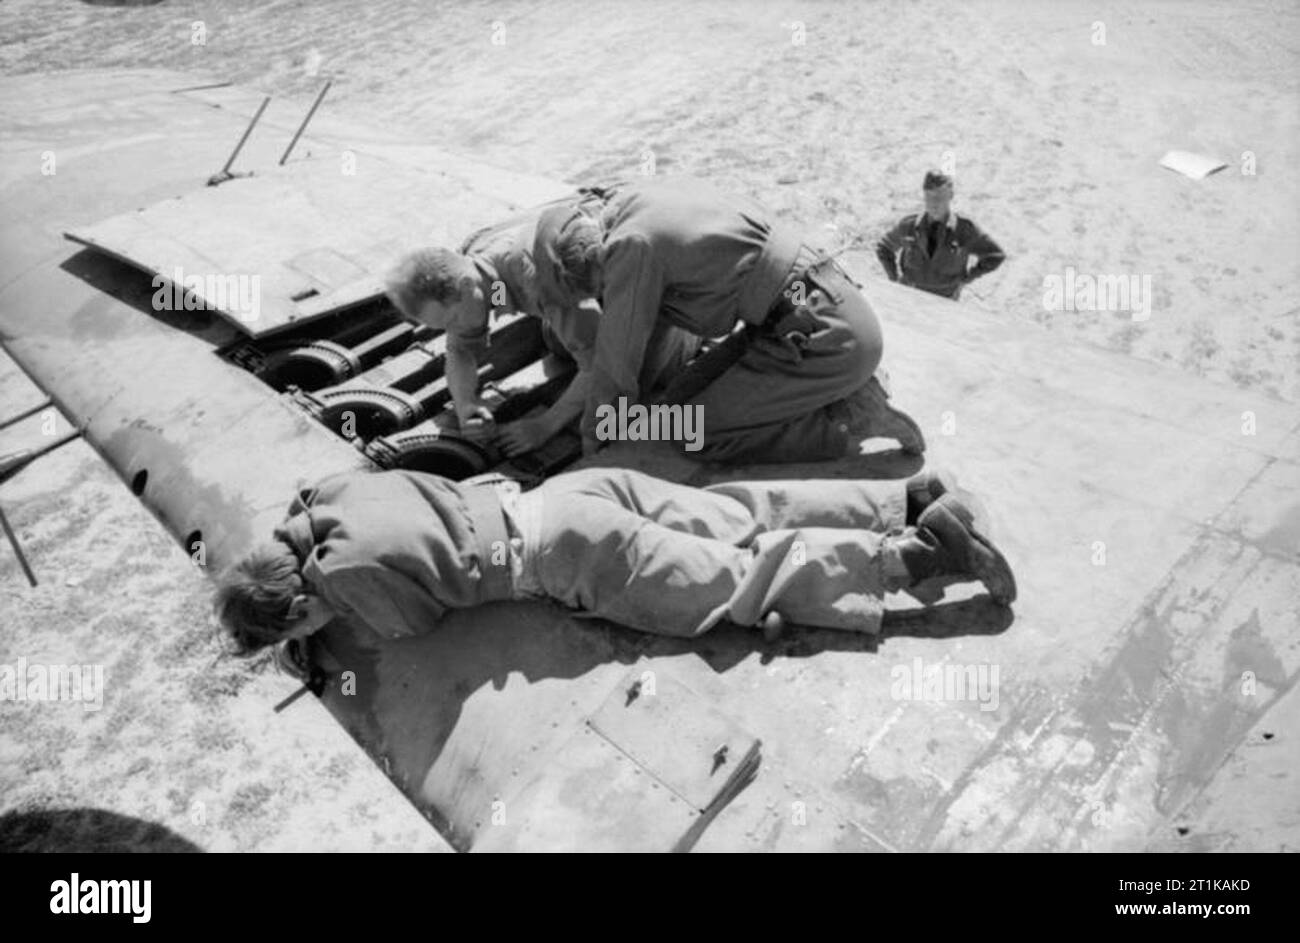 Royal Air Force Operations in the Middle East and North Africa, 1939-1943. Armourers of No. 89 Squadron RAF installing a .303 Browning machine gun in the wing of a Bristol Beaufighter Mark VIF at Castel Benito, Libya. Stock Photo